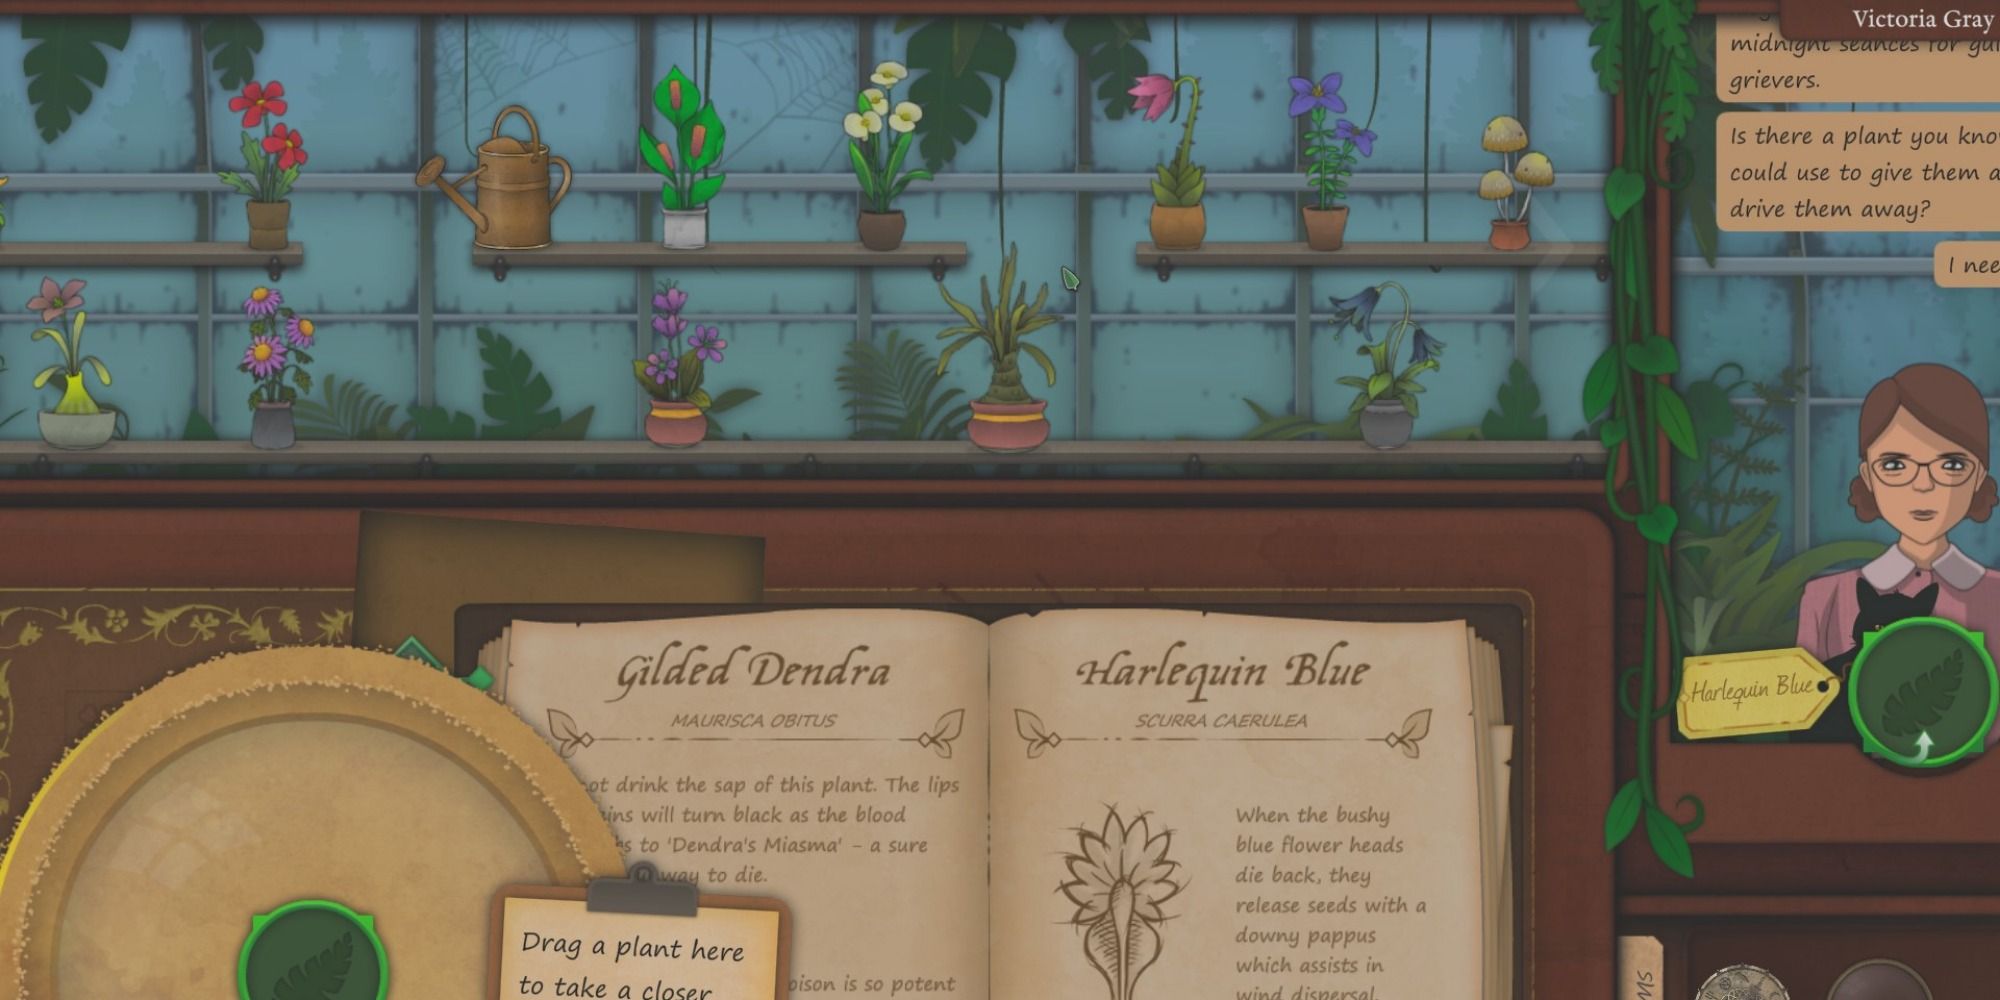 A zoomed in view of the plants on the greenhouse shelf over the shopkeeper's work station